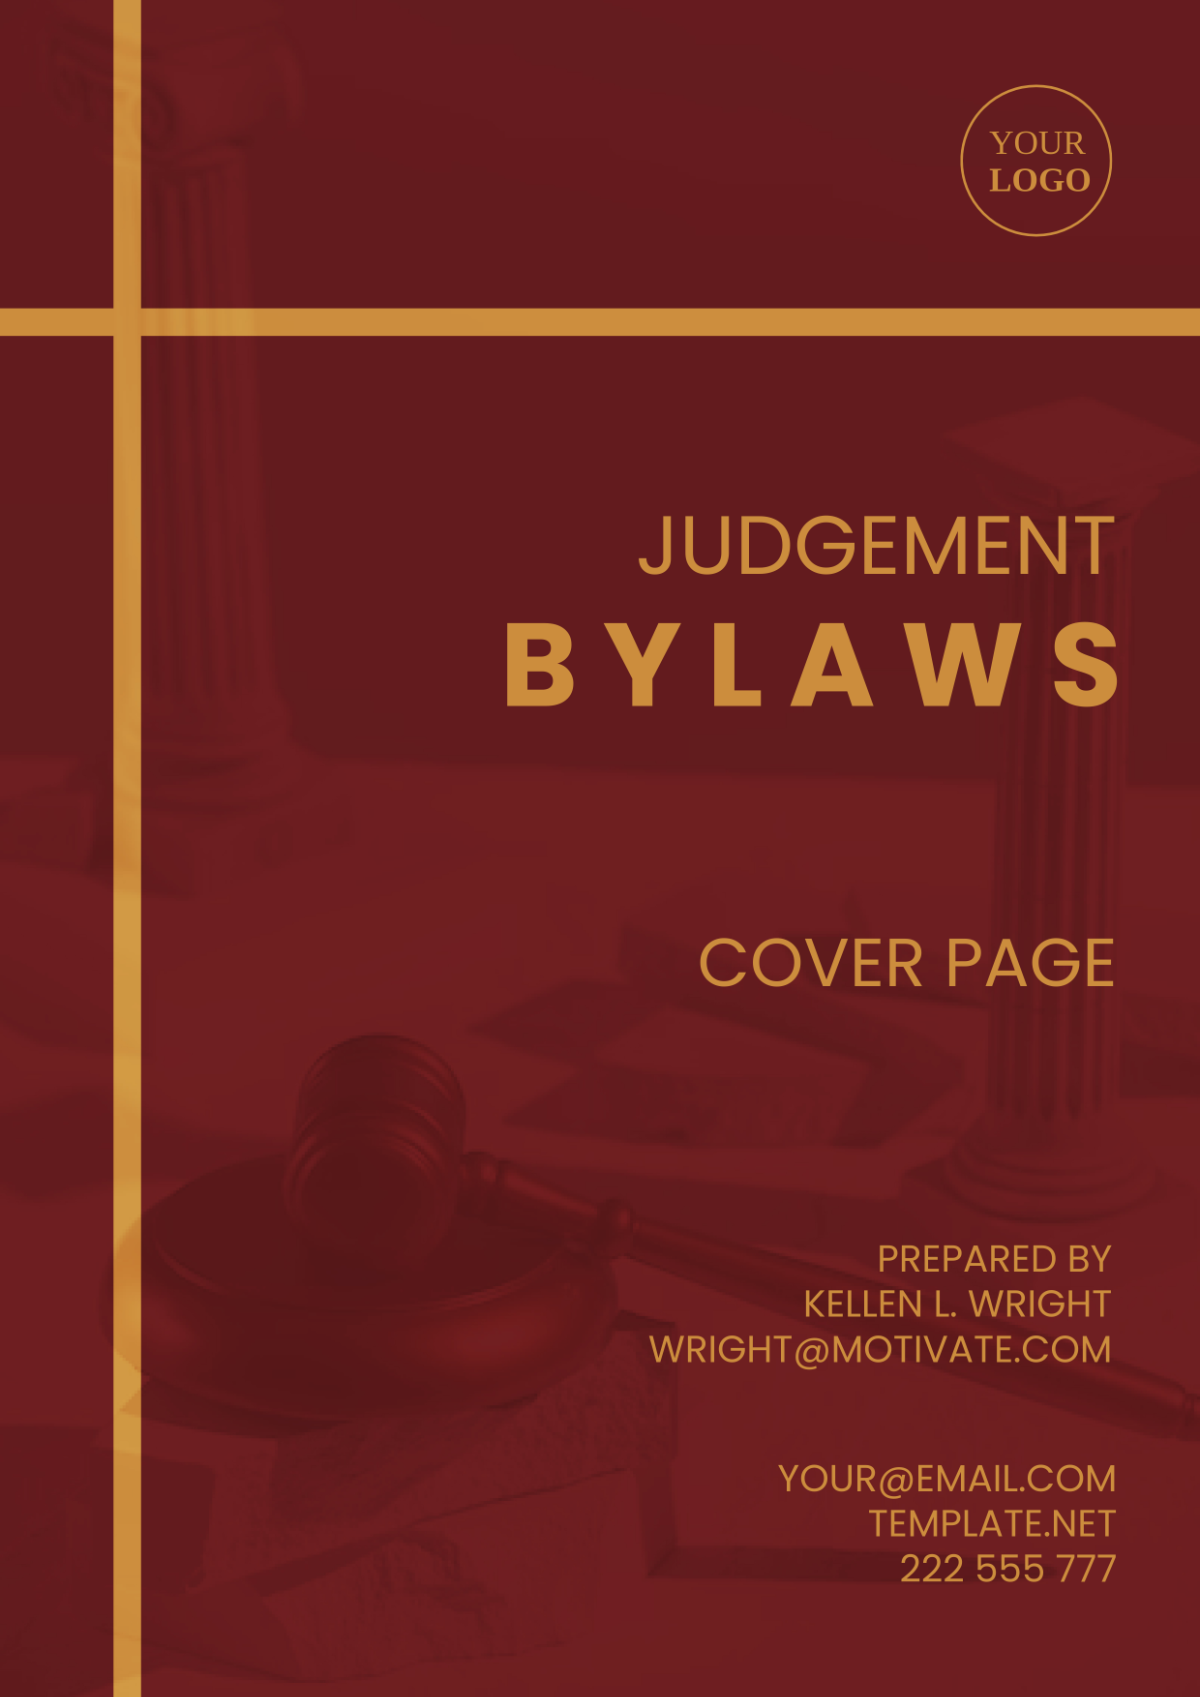 Judgement Bylaws Cover Page Template